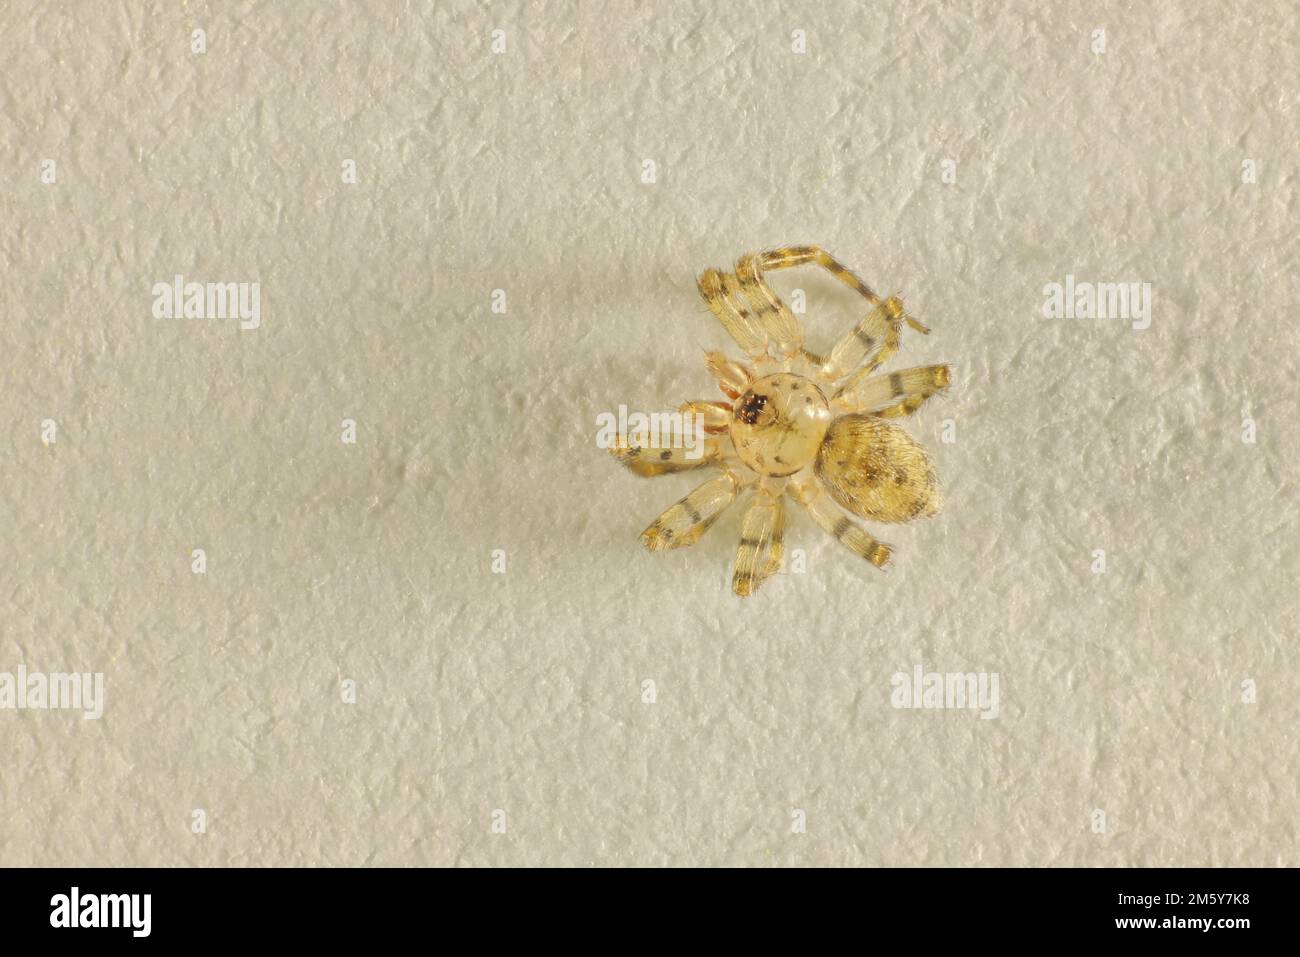 Close-up dorsal view of isolated Wall Spider (Oecobius) Stock Photo